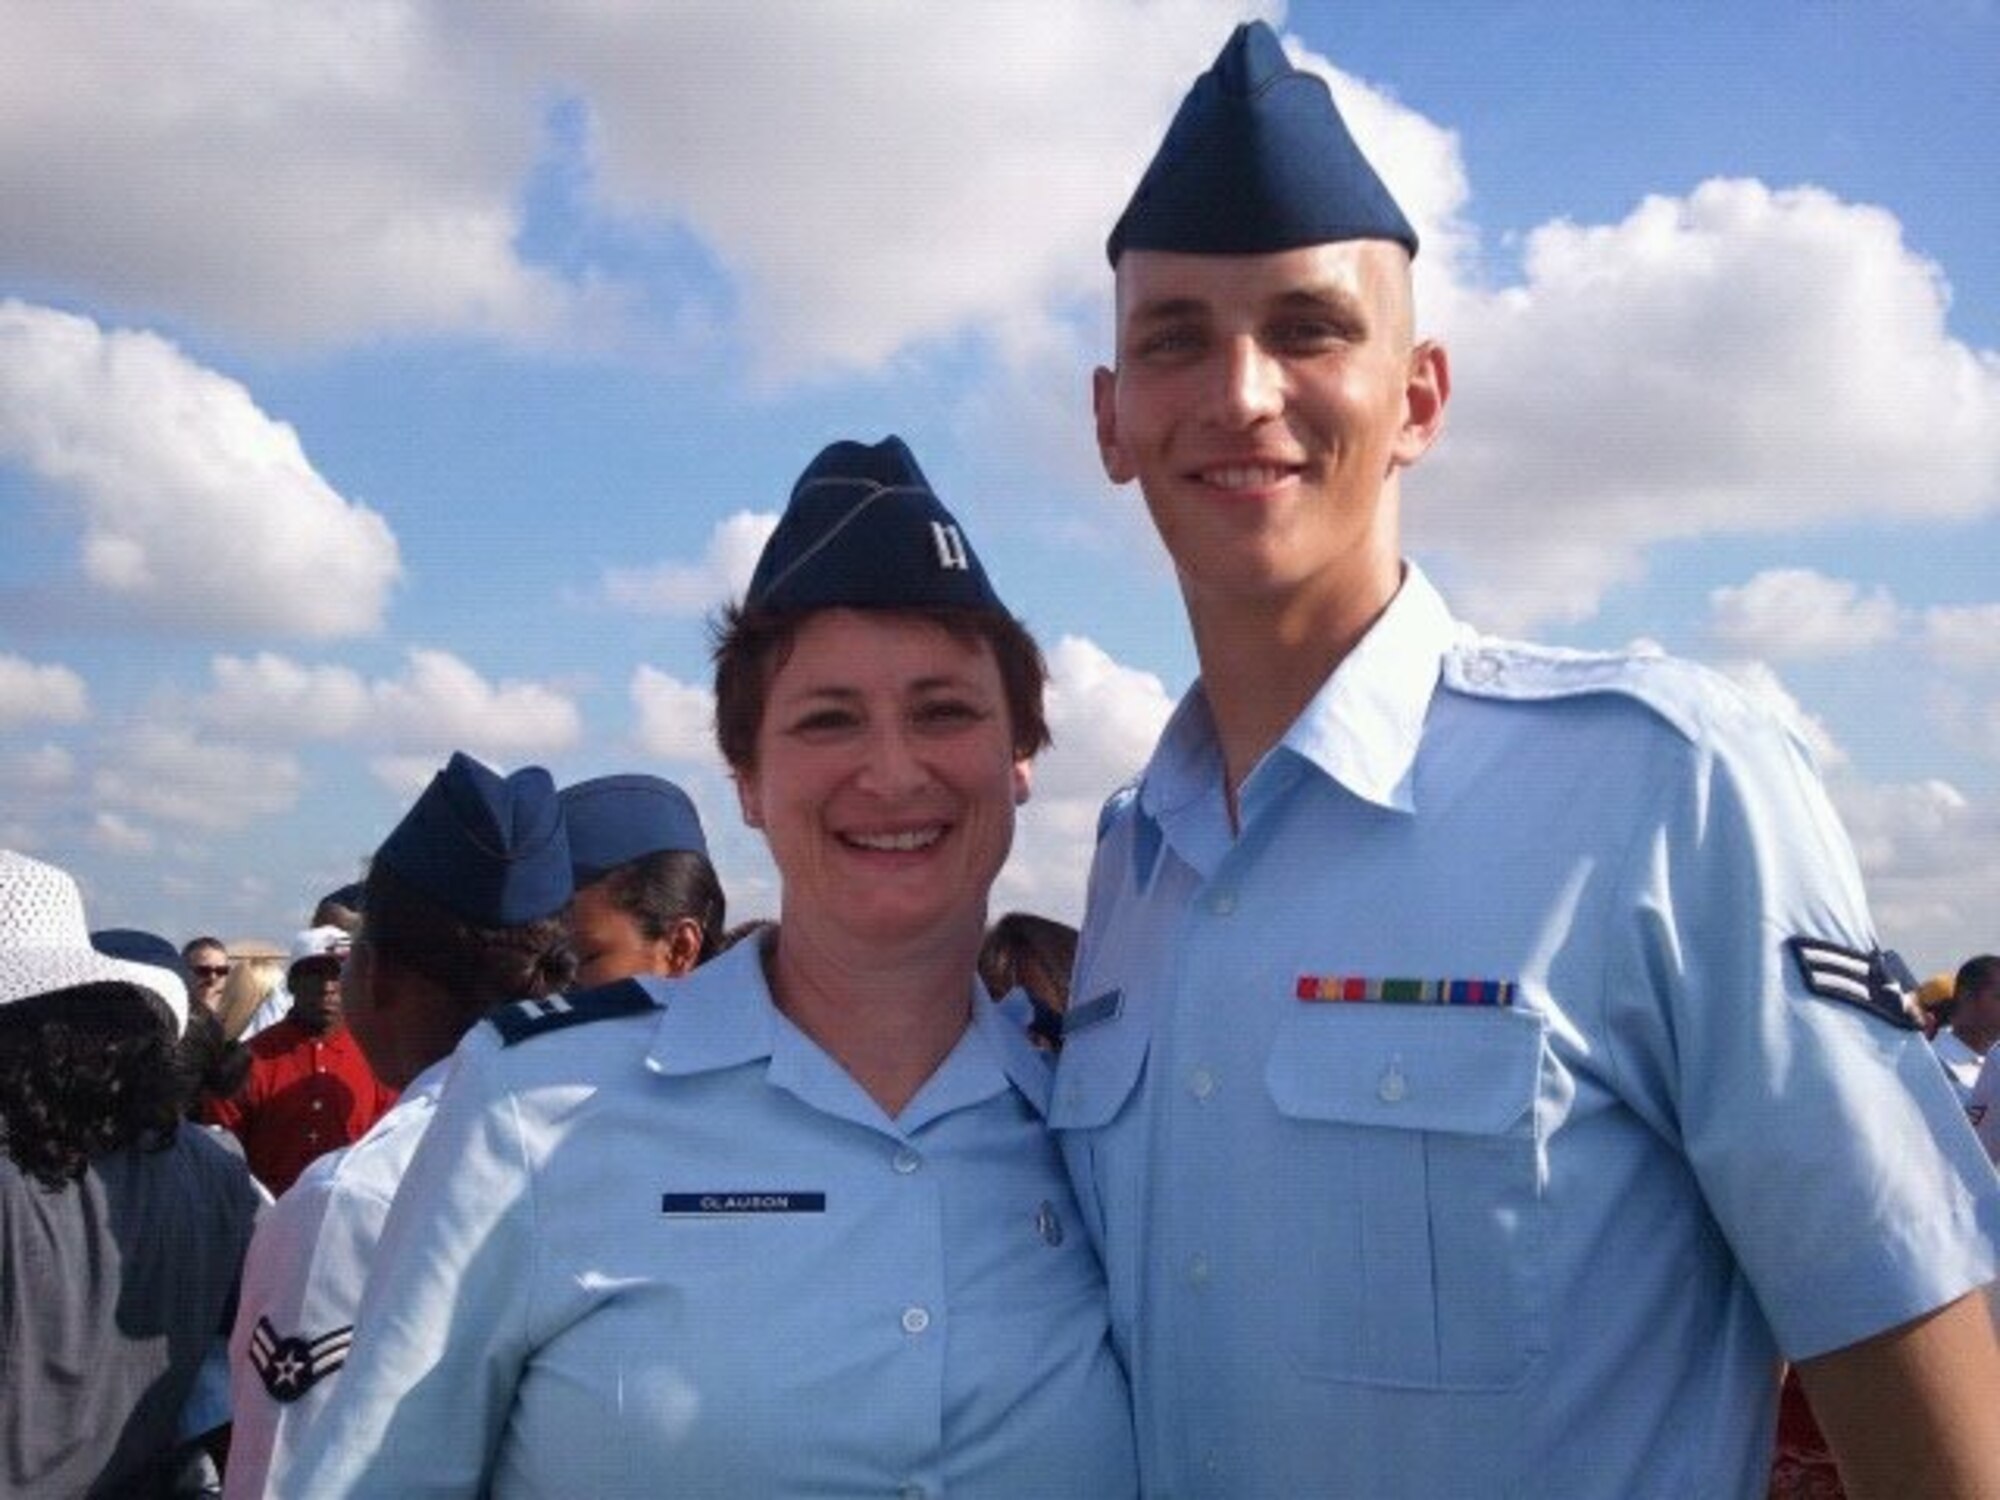 Capt. Dawn Clauson, 99th Medical Operations Squadron pediatric clinic nurse manager, poses with her son, Airman 1st Class David Clauson, 22nd Aerospace Medical Squadron medical technician, during his Basic Military Training graduation in 2011, at Joint Base San Antonio, Texas. Dawn commissioned in 2006, and four of her six children have also joined Air Force. (Courtesy photo)